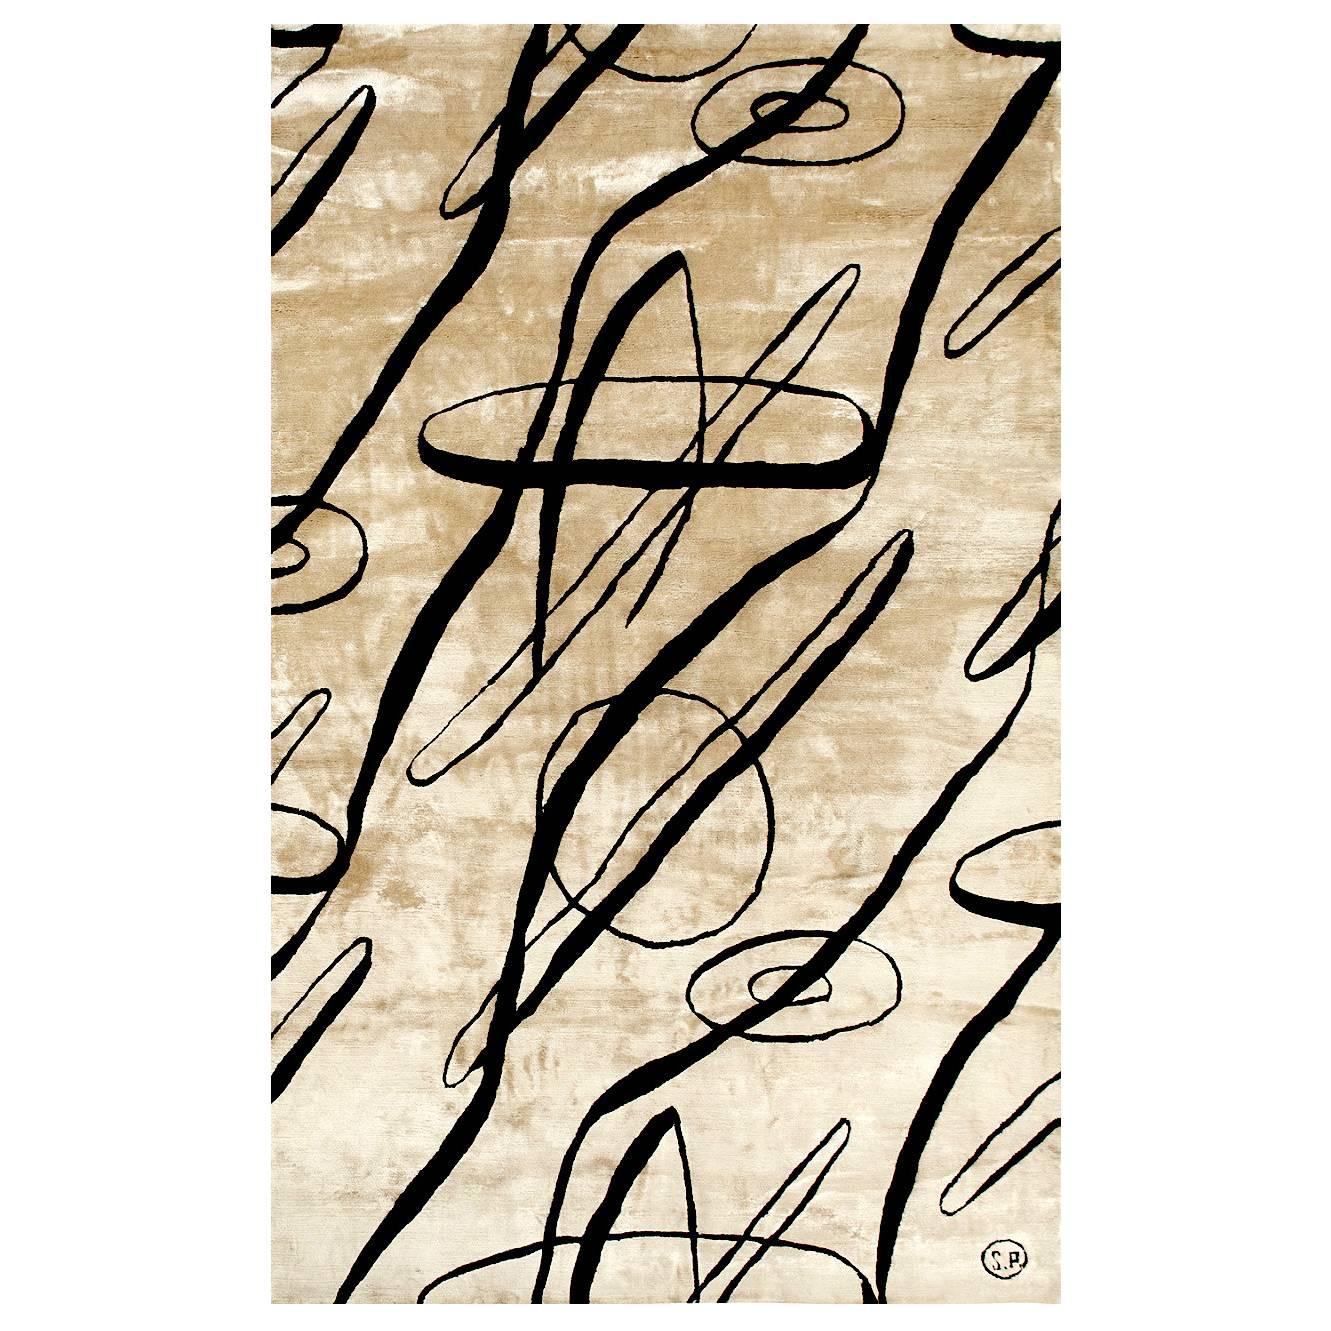 Serge Poliakoff Limited Silk Rugs Edition (Ed. of 6) For Sale